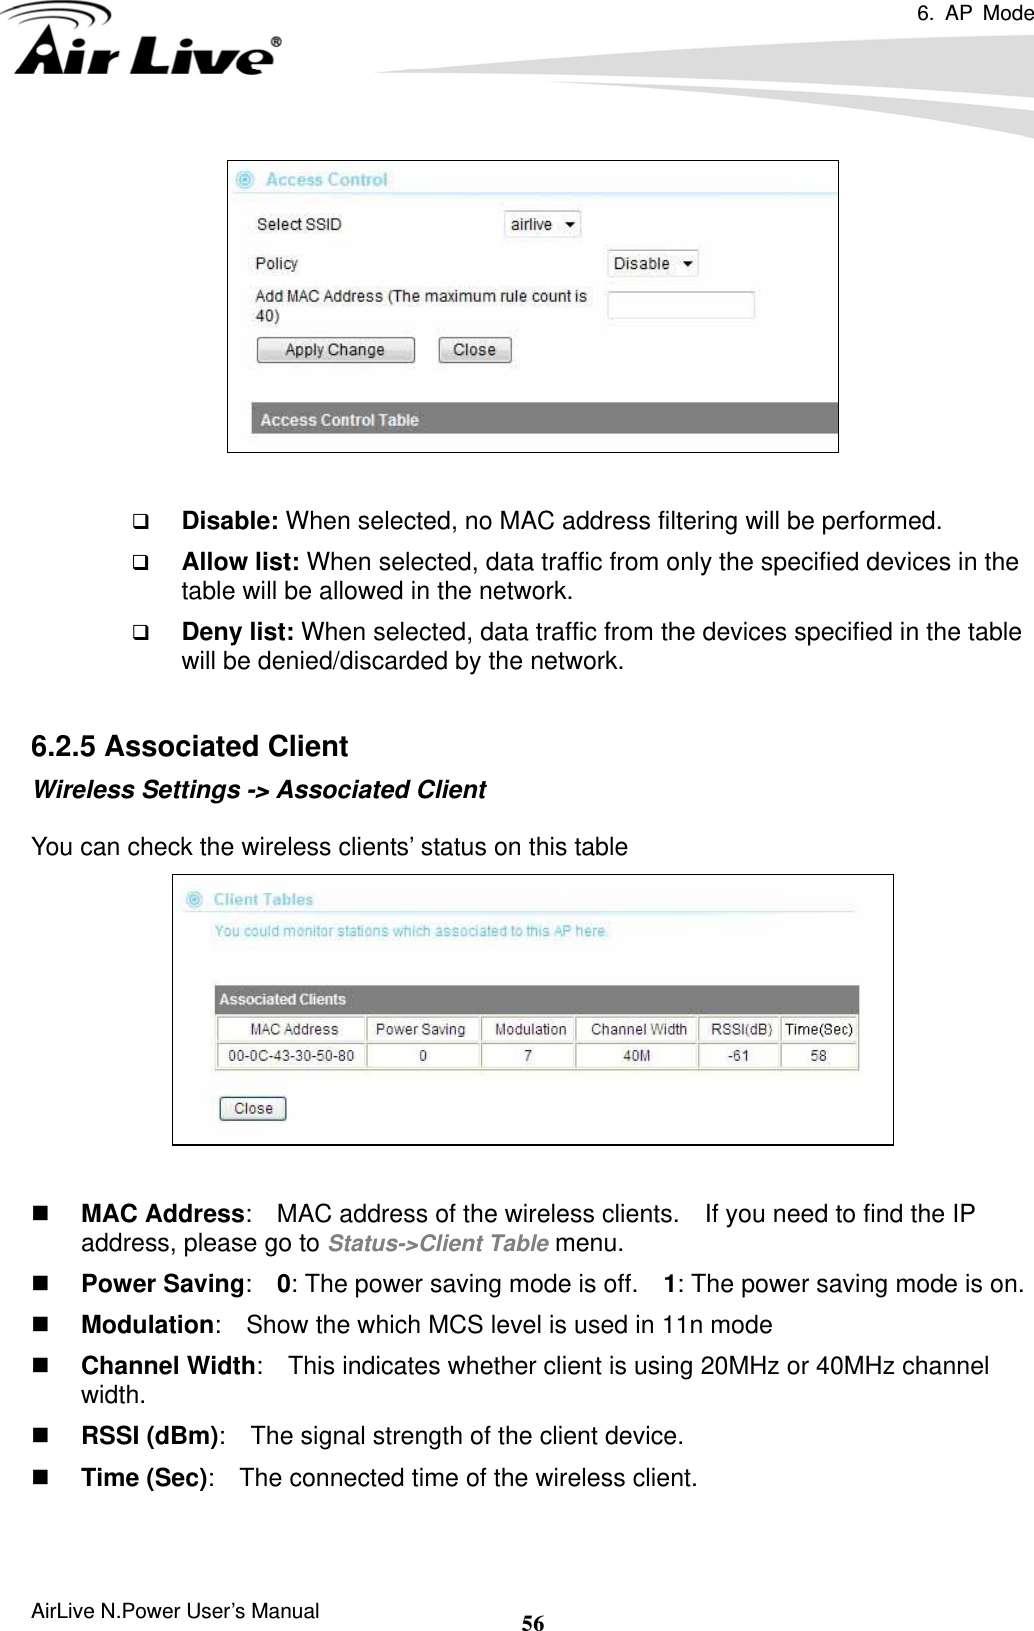 6. AP Mode  AirLive N.Power User’s Manual  56   Disable: When selected, no MAC address filtering will be performed.    Allow list: When selected, data traffic from only the specified devices in the table will be allowed in the network.    Deny list: When selected, data traffic from the devices specified in the table will be denied/discarded by the network.  6.2.5 Associated Client Wireless Settings -&gt; Associated Client  You can check the wireless clients’ status on this table    MAC Address:    MAC address of the wireless clients.    If you need to find the IP address, please go to Status-&gt;Client Table menu.  Power Saving:  0: The power saving mode is off.    1: The power saving mode is on.  Modulation:    Show the which MCS level is used in 11n mode  Channel Width:    This indicates whether client is using 20MHz or 40MHz channel width.  RSSI (dBm):    The signal strength of the client device.  Time (Sec):    The connected time of the wireless client.  